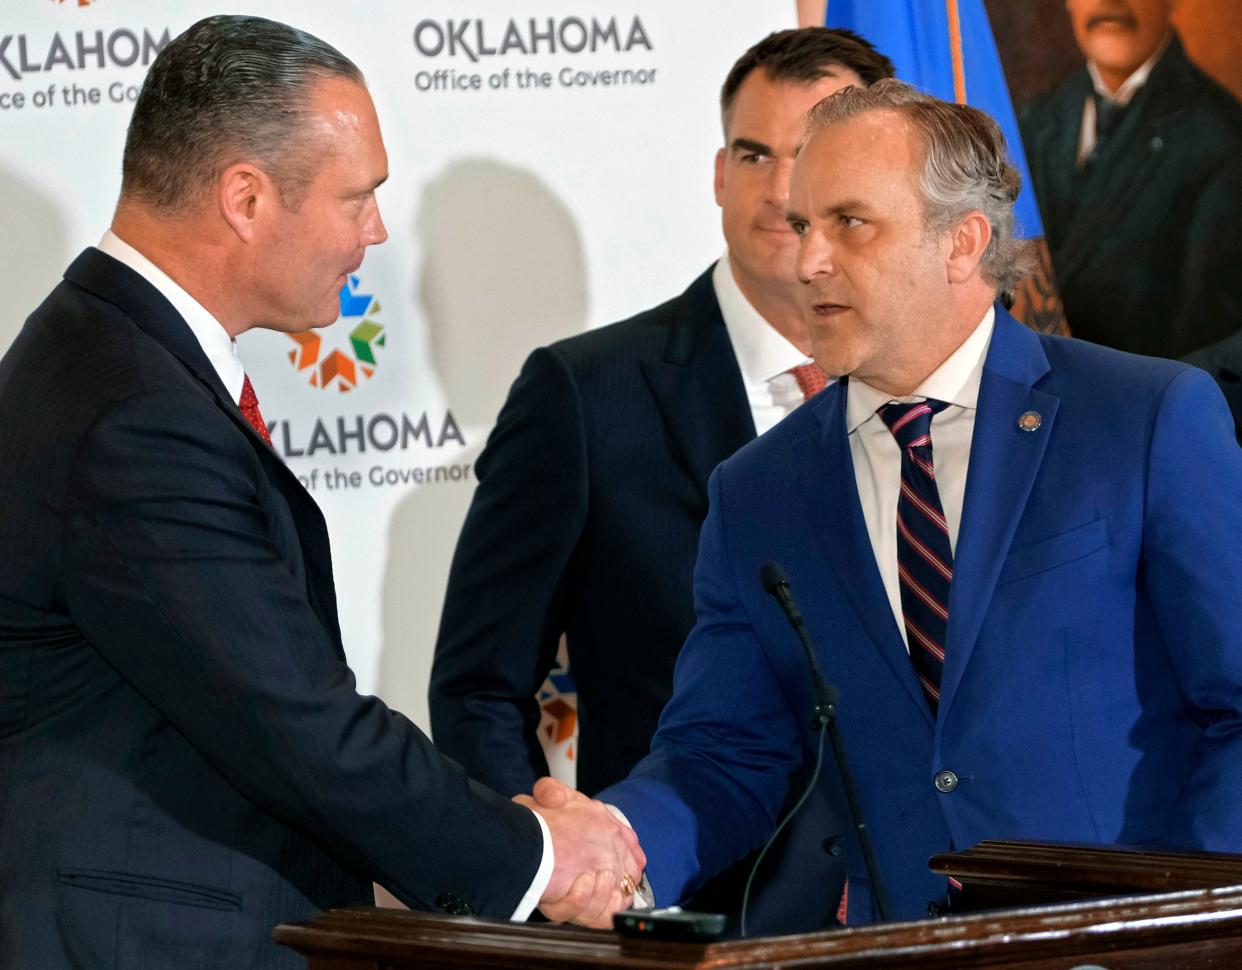 House Speaker Charles McCall, left, welcomes Senate President Pro Tem Greg Treat to the podium as Gov. Kevin Stitt looks on at a 2023 news conference. All three Republican leaders are backing the creation of a new state law intended to discourage undocumented immigrants from coming to Oklahoma.